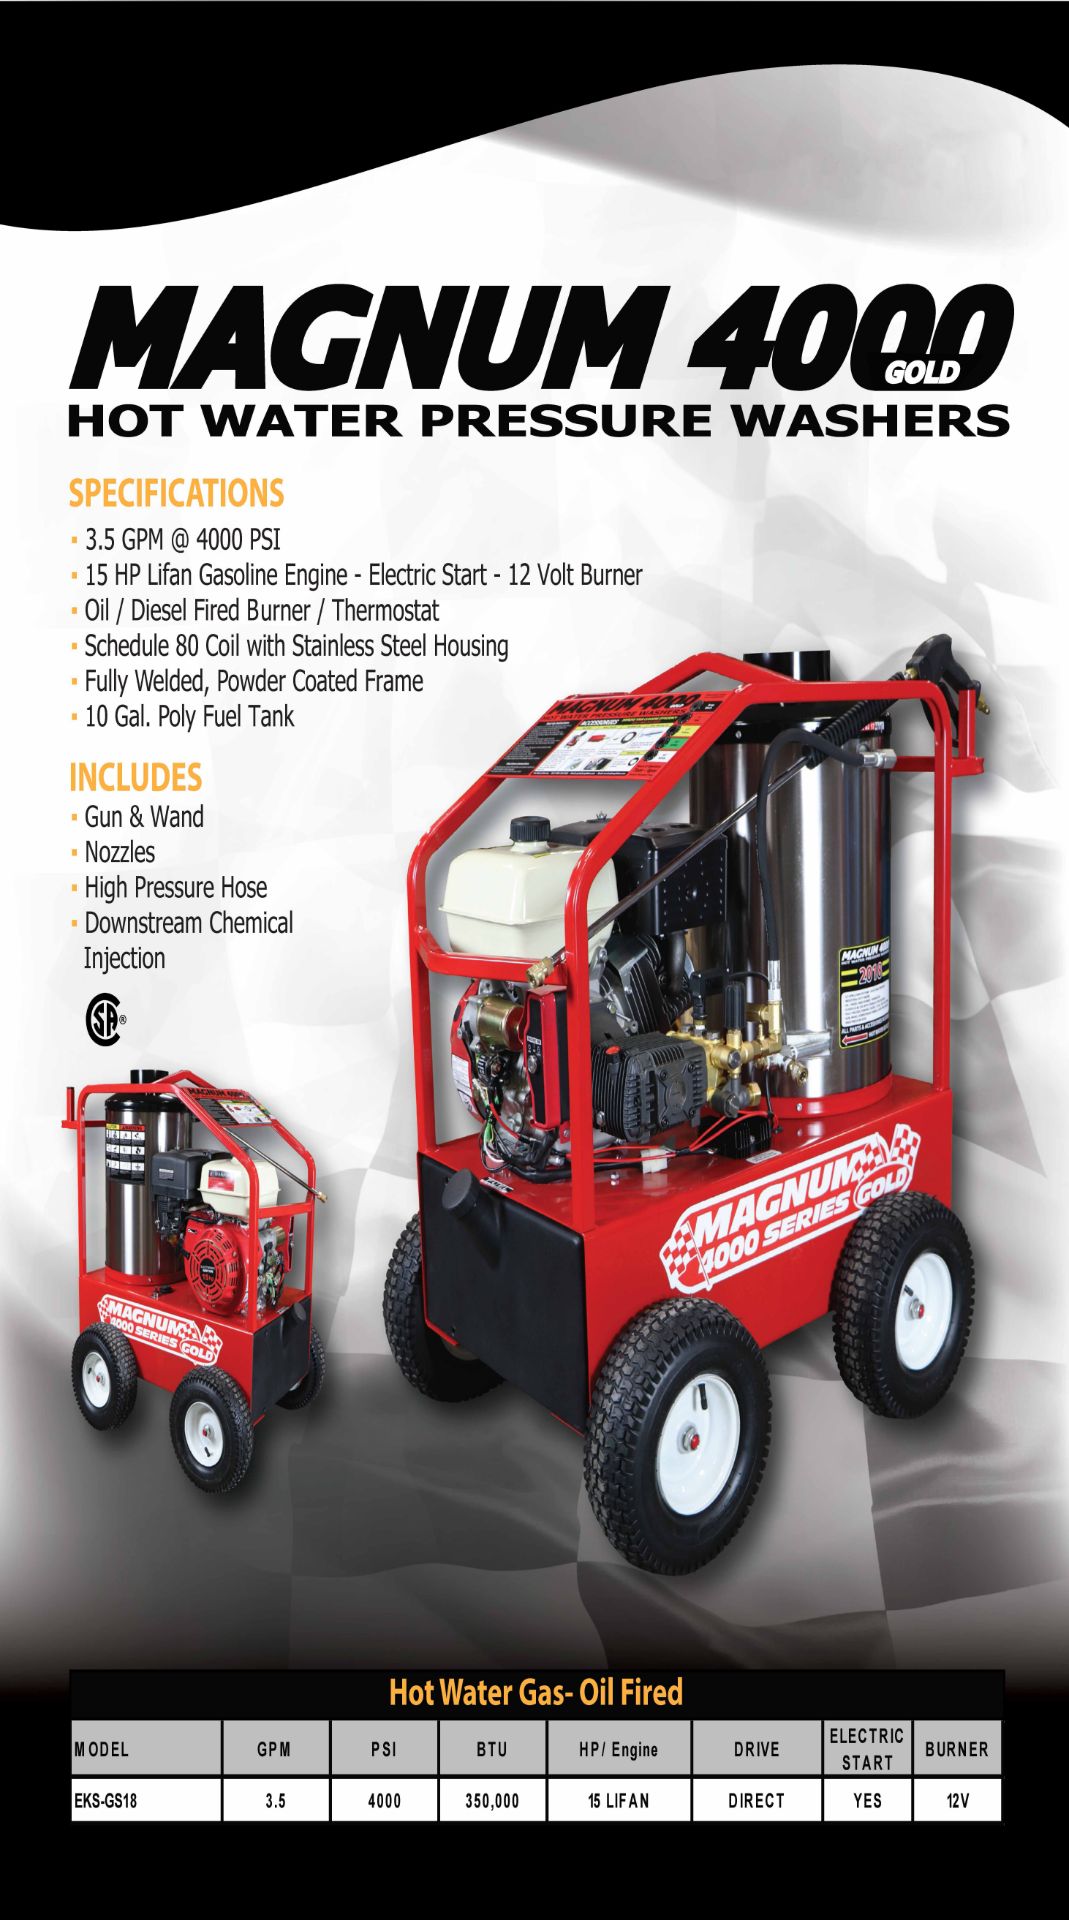 BRAND NEW EASY-KLEEN HOT WATER PRESSURE WASHER MODEL MAGNUM GOLD, LOCATION: HAWKESBURY, ONTARIO - Image 11 of 11